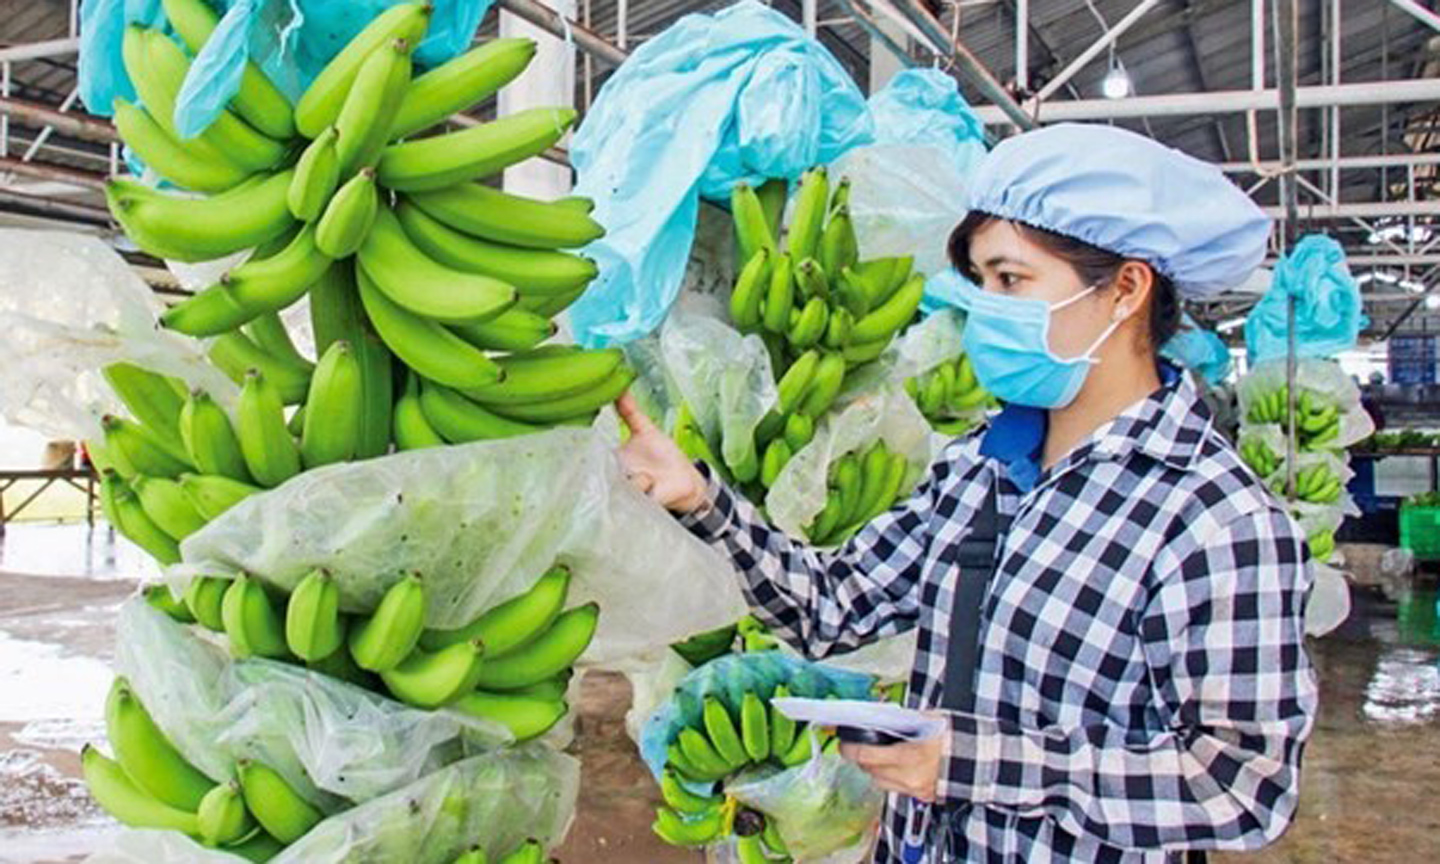 ABO/NDO- The export of dragon fruit, banana and durian is expected to contribute 2 billion USD to the country’s export turnover in 2023.